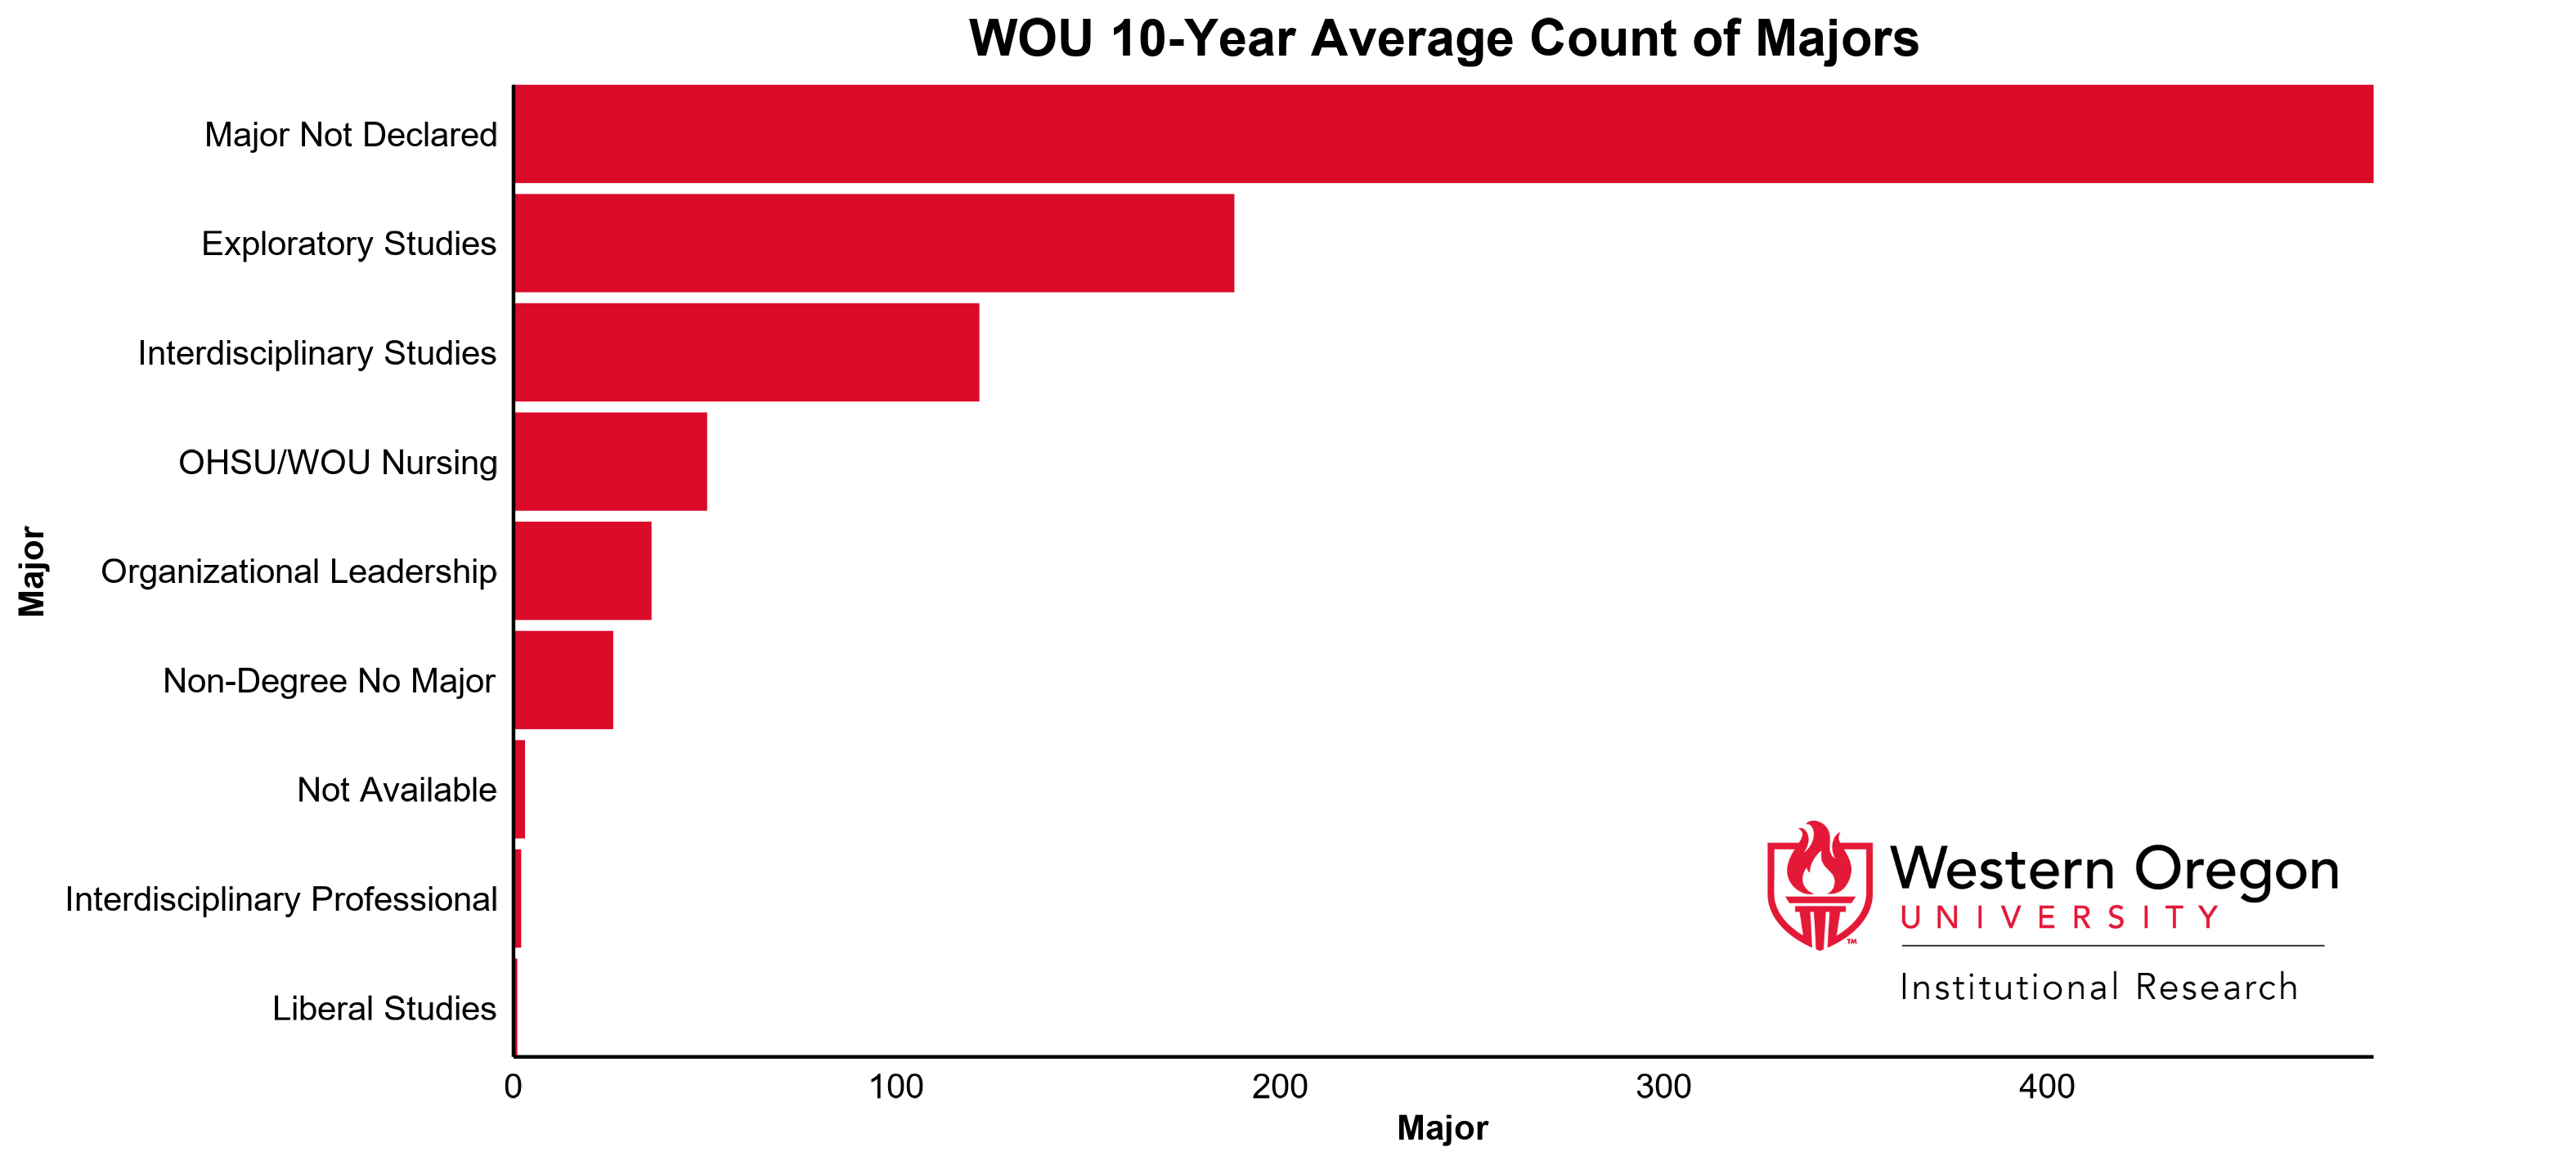 Bar graph of the 10-year average count of majors at WOU for majors without a division